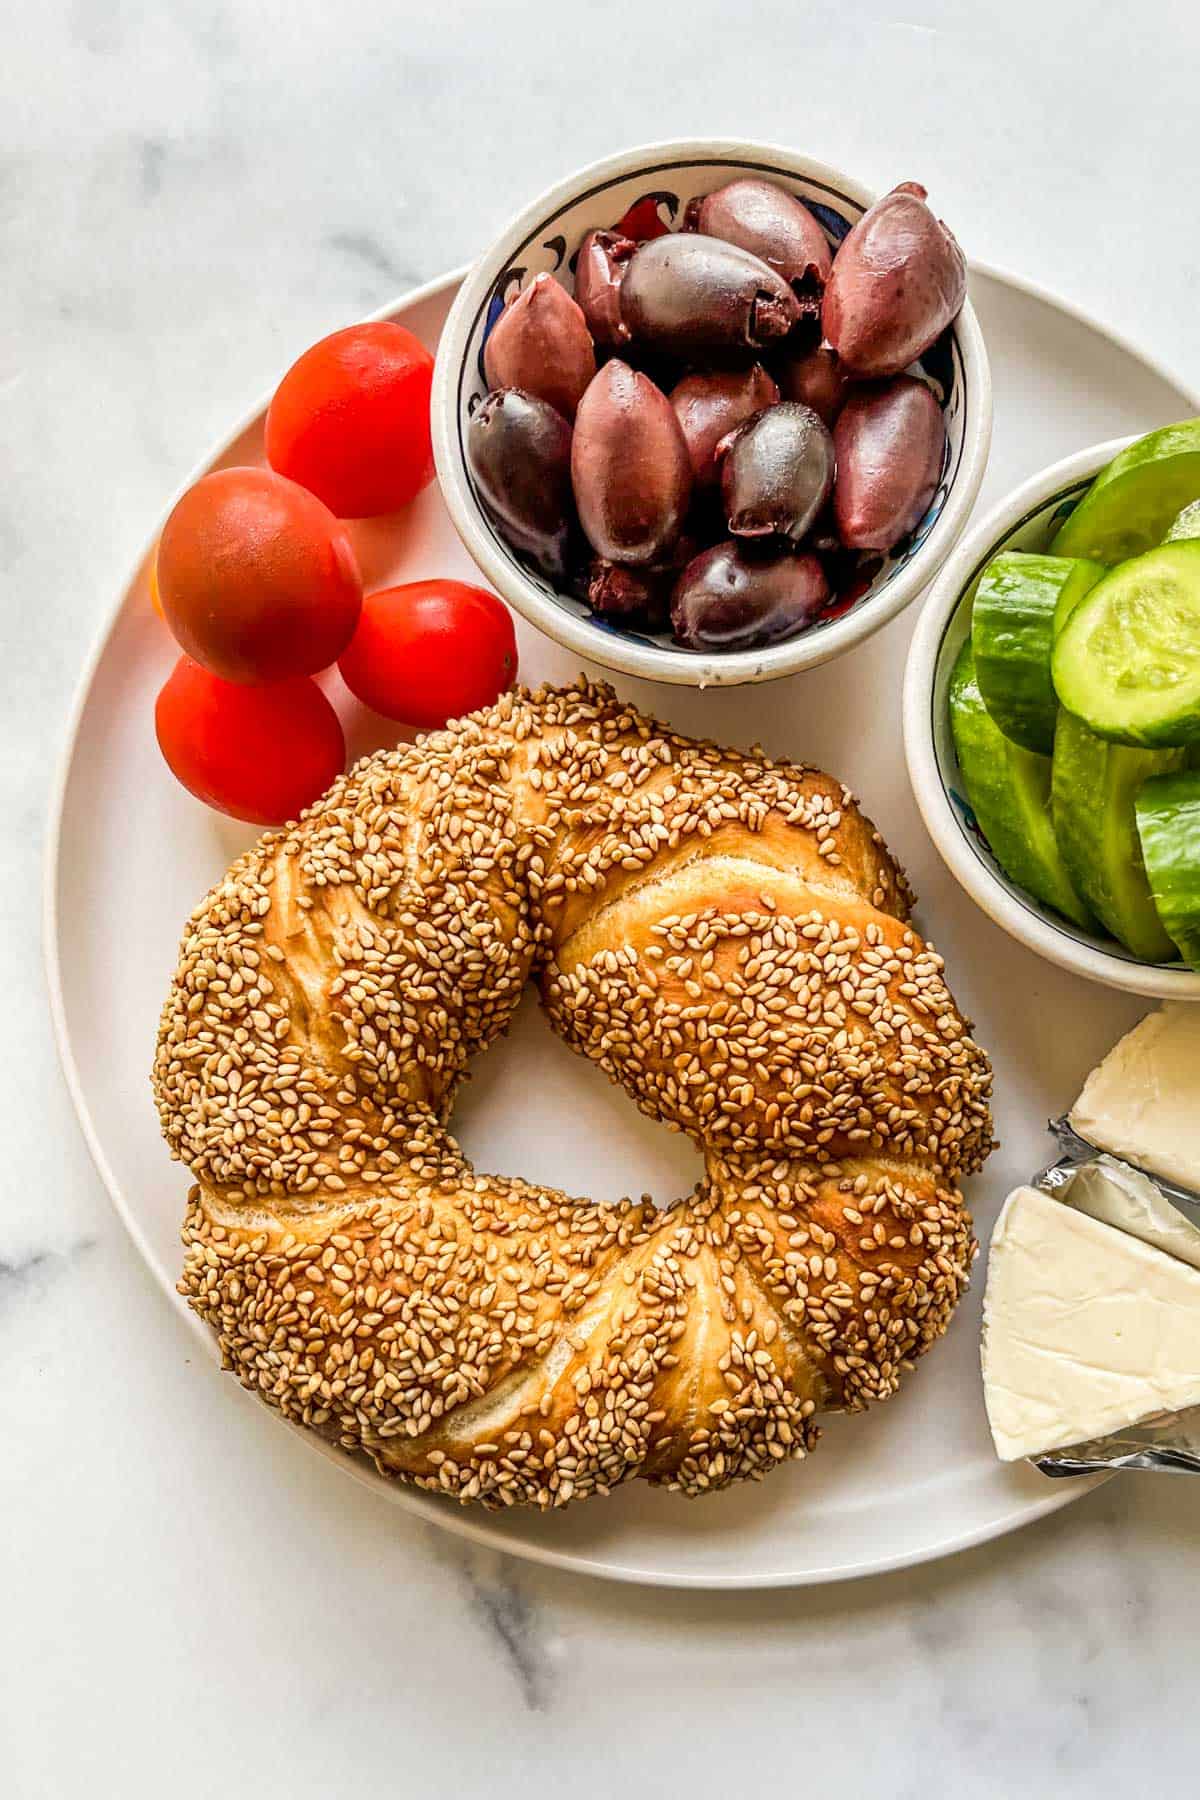 A Turkish simit bread on a plate with tomatoes, olives, cucumber, and cheese.